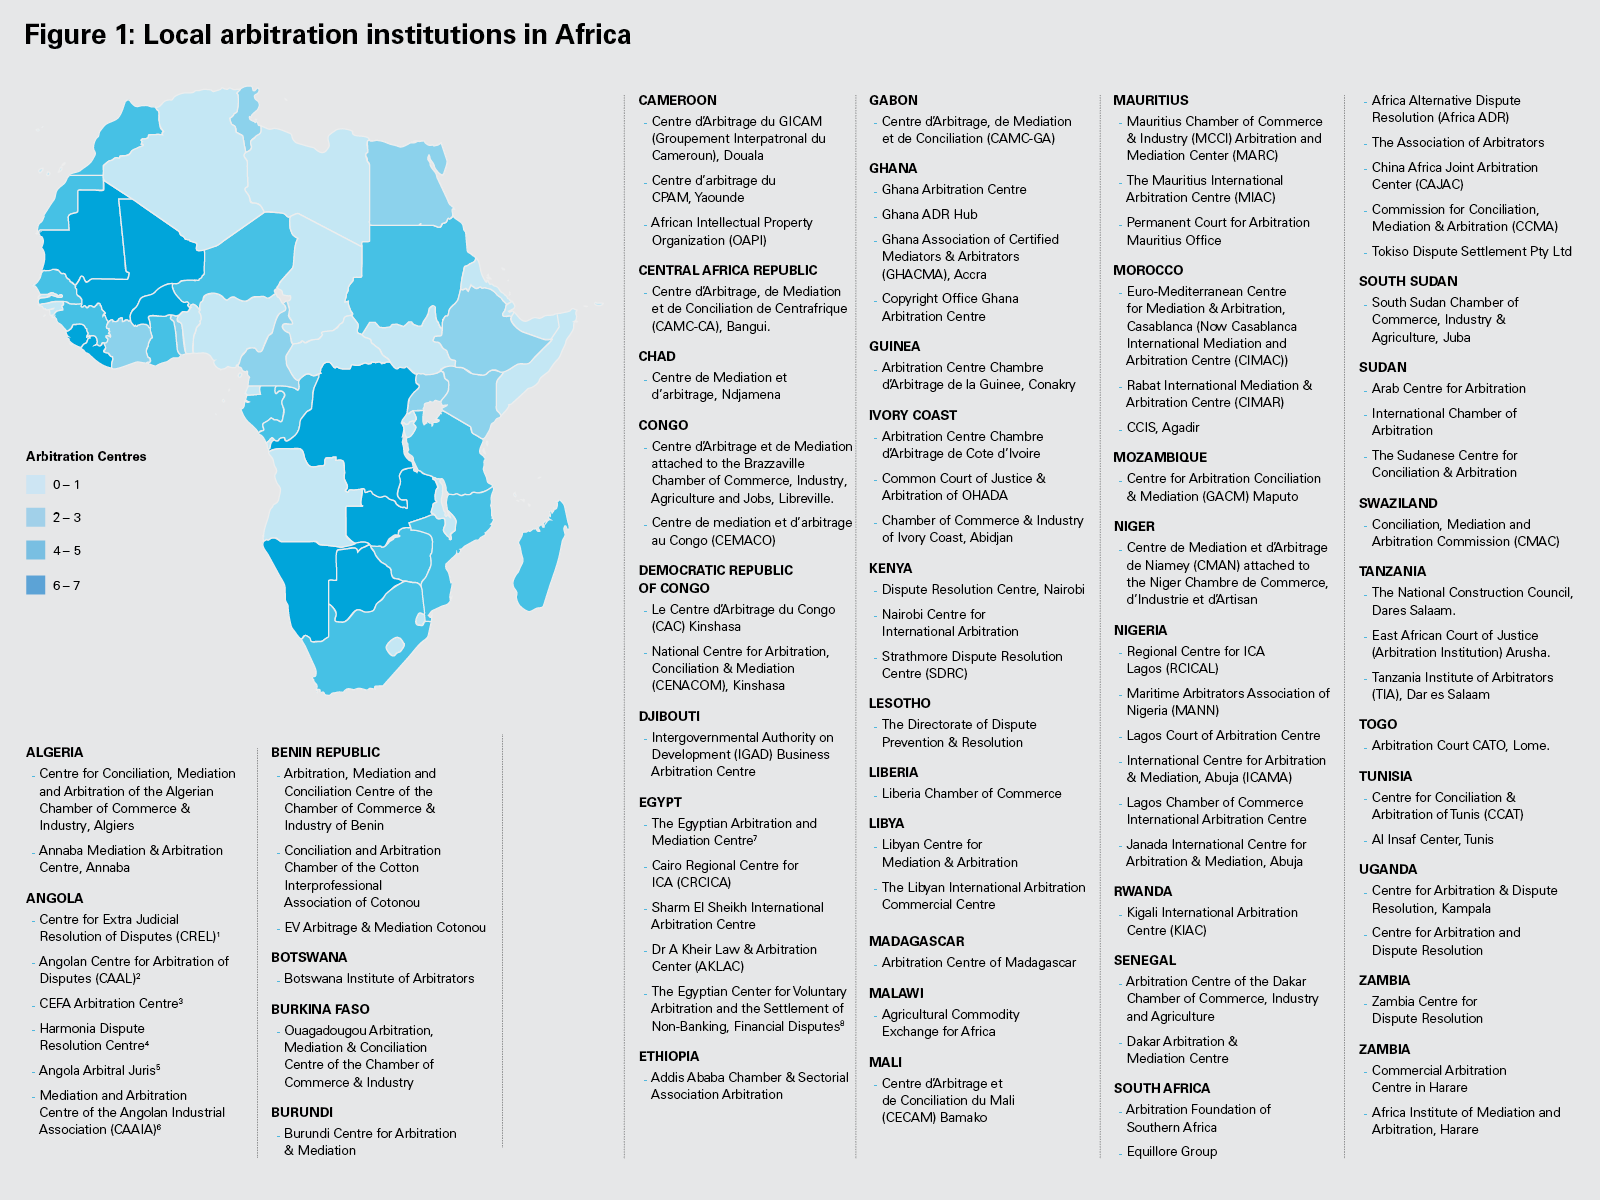 Figure 1: Local arbitration institutions in Africa (PNG)